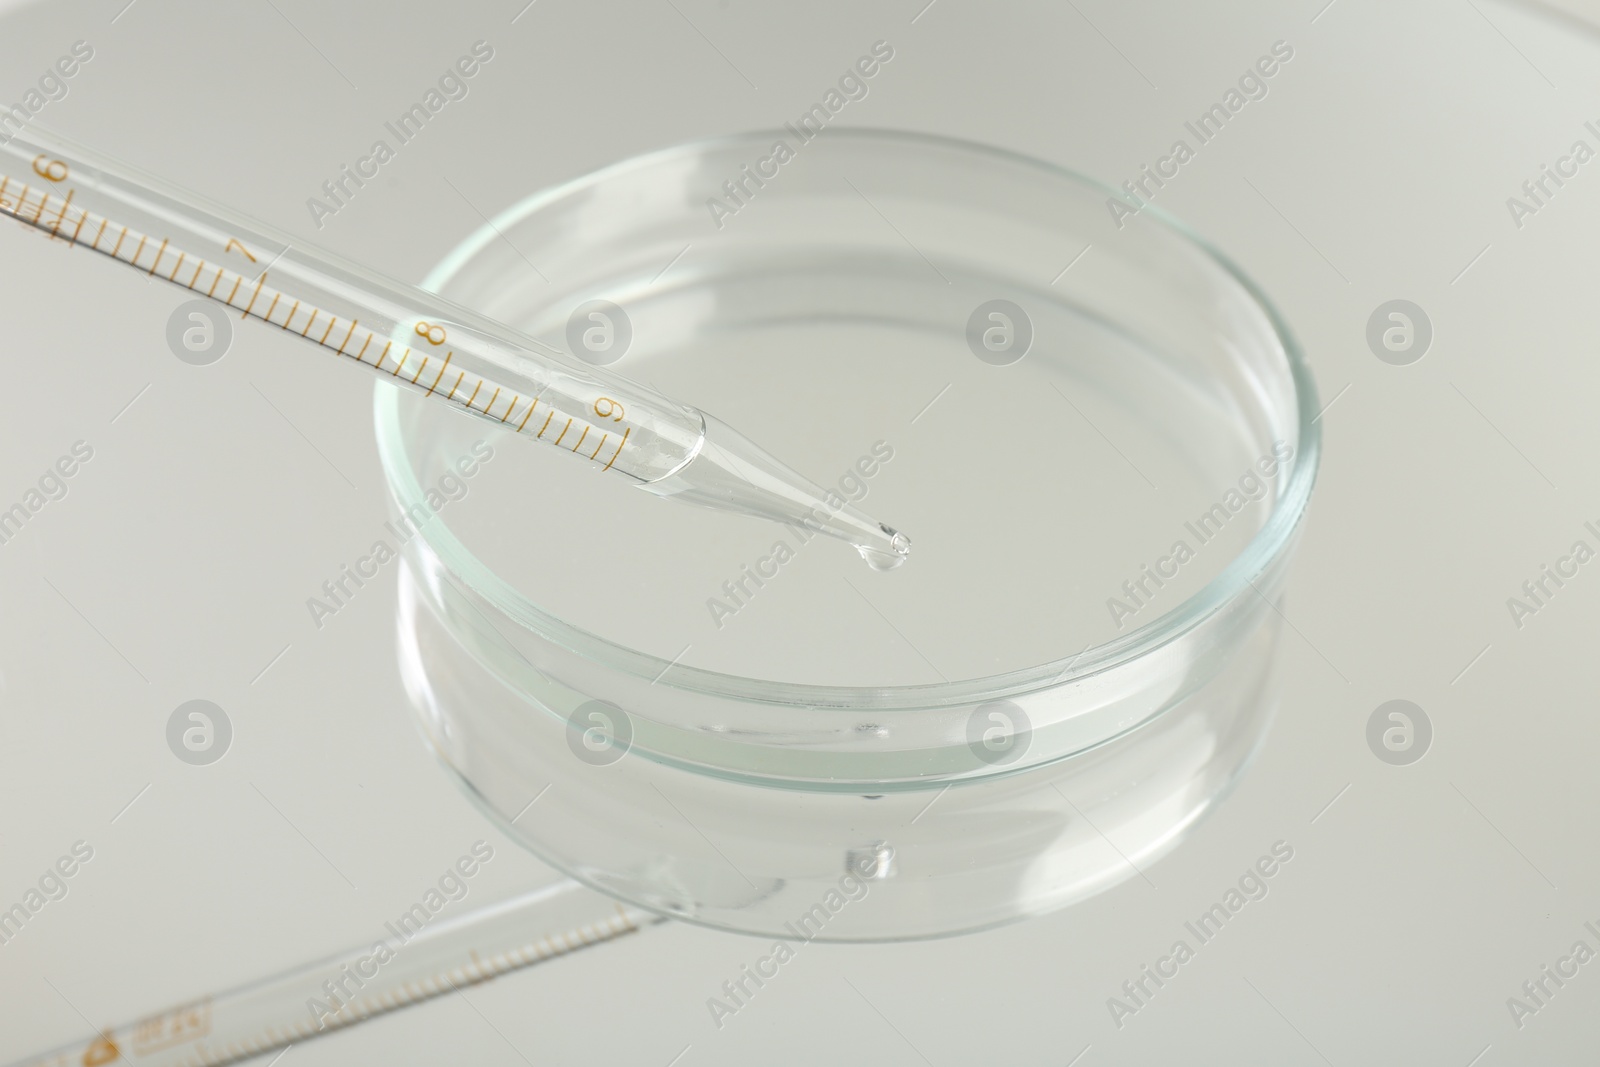 Photo of Dripping liquid from pipette into petri dish on mirror surface, closeup